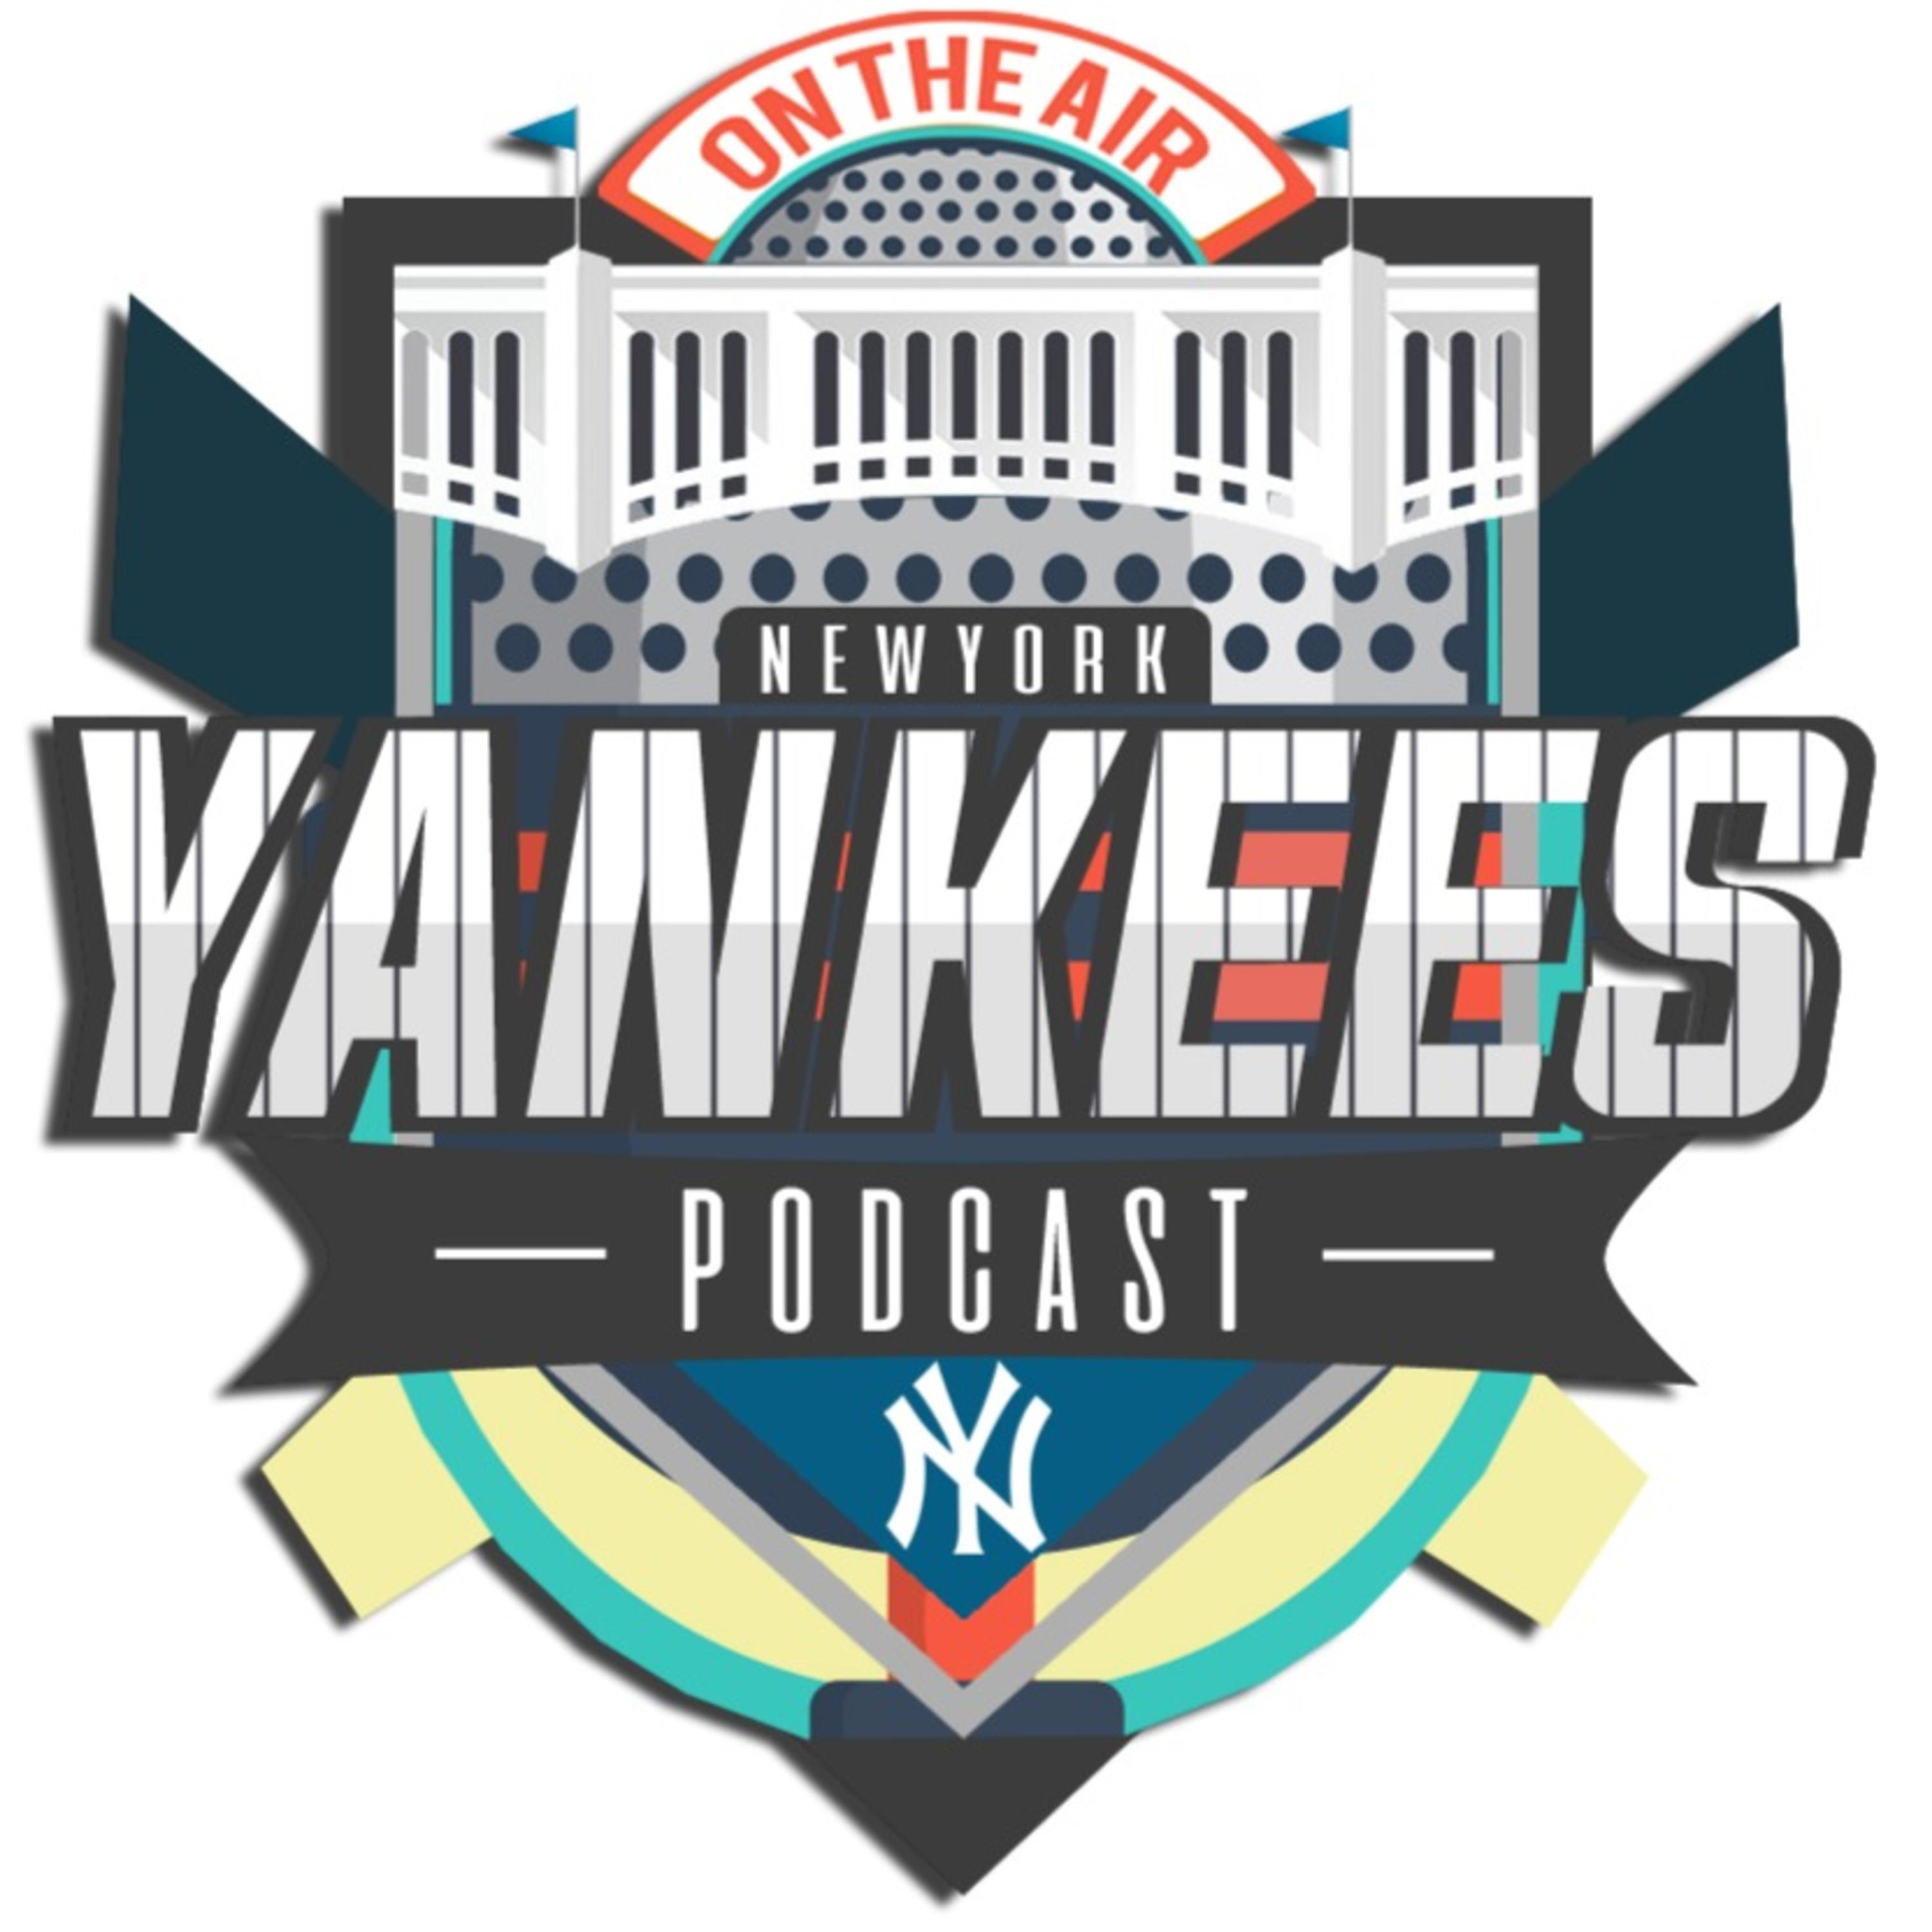 New York Yankees Hungary Podcast - Bé x DS! x Mike - S05EP17